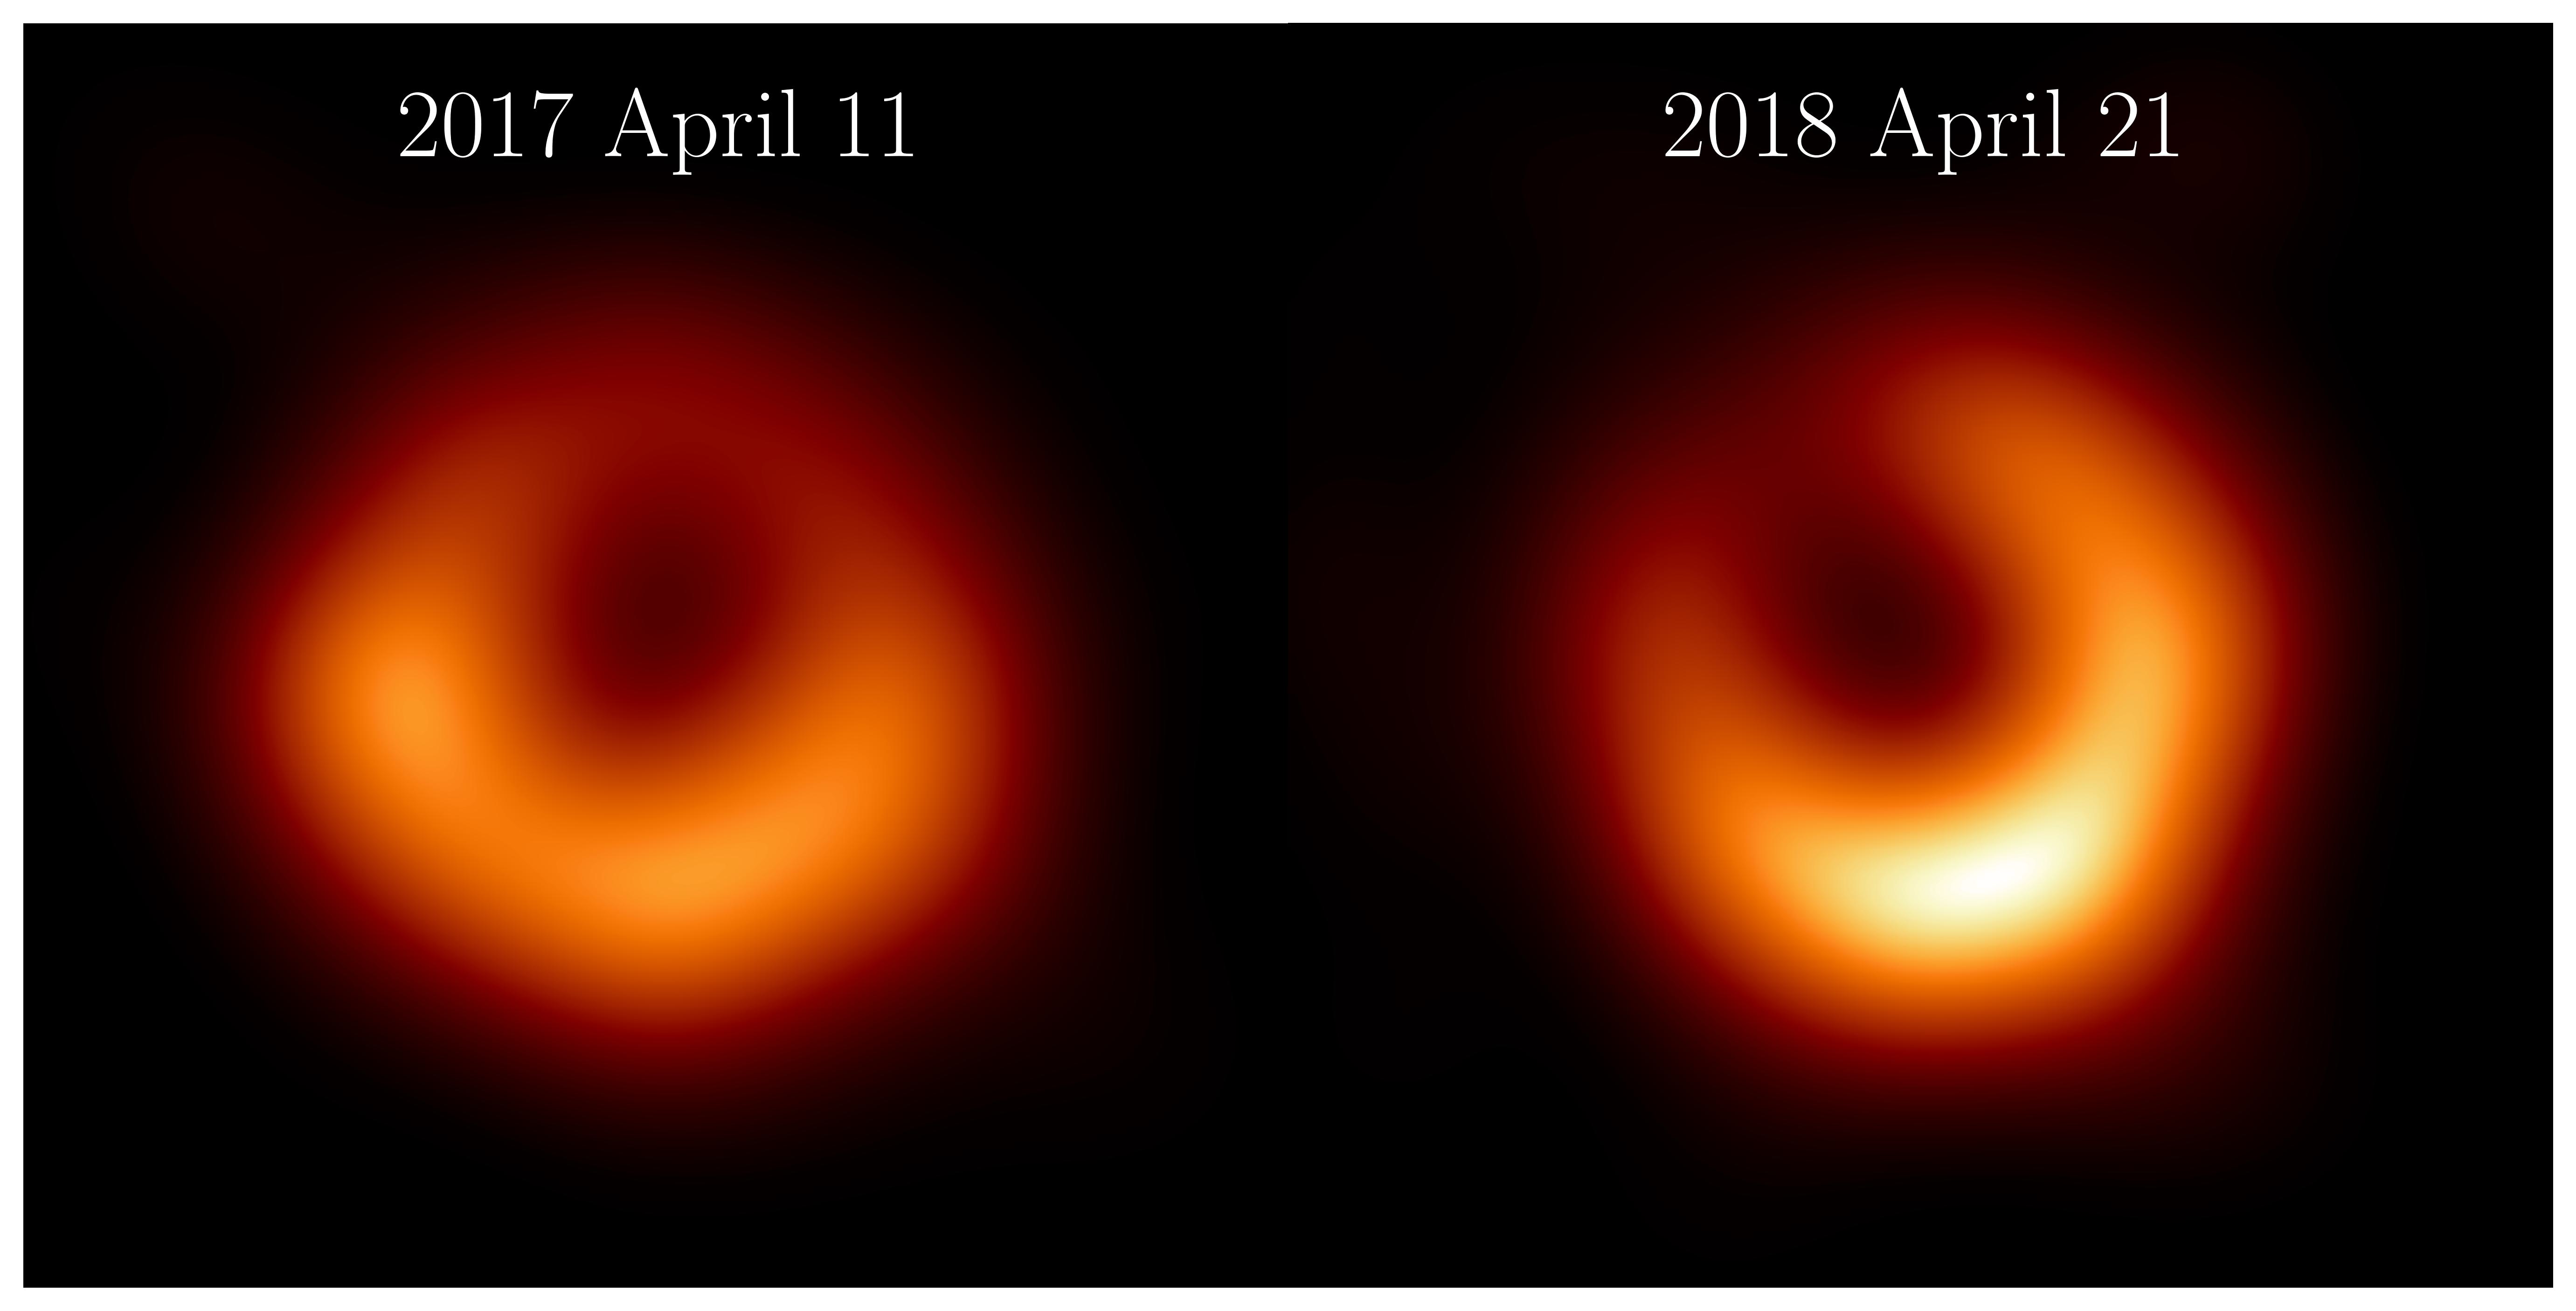 New Images of M87*: Proof of a Persistent Black Hole Shadow